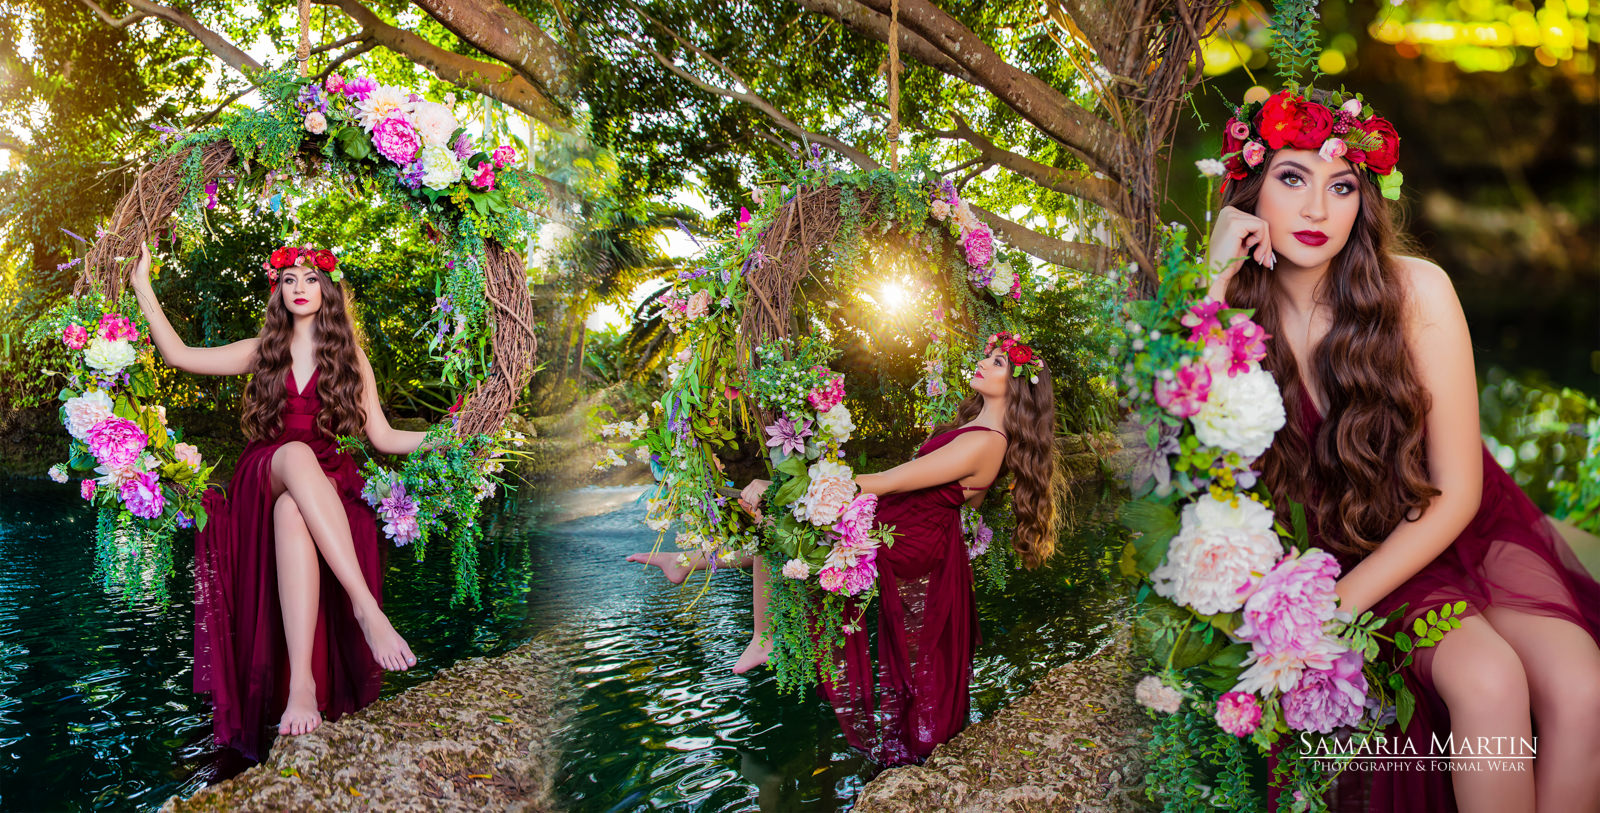 Quinceanera with flowers, quinceanera photoshoot in a lake, 15 photoshoot with flowers, best Tampa photographer, Samaria Martin 2